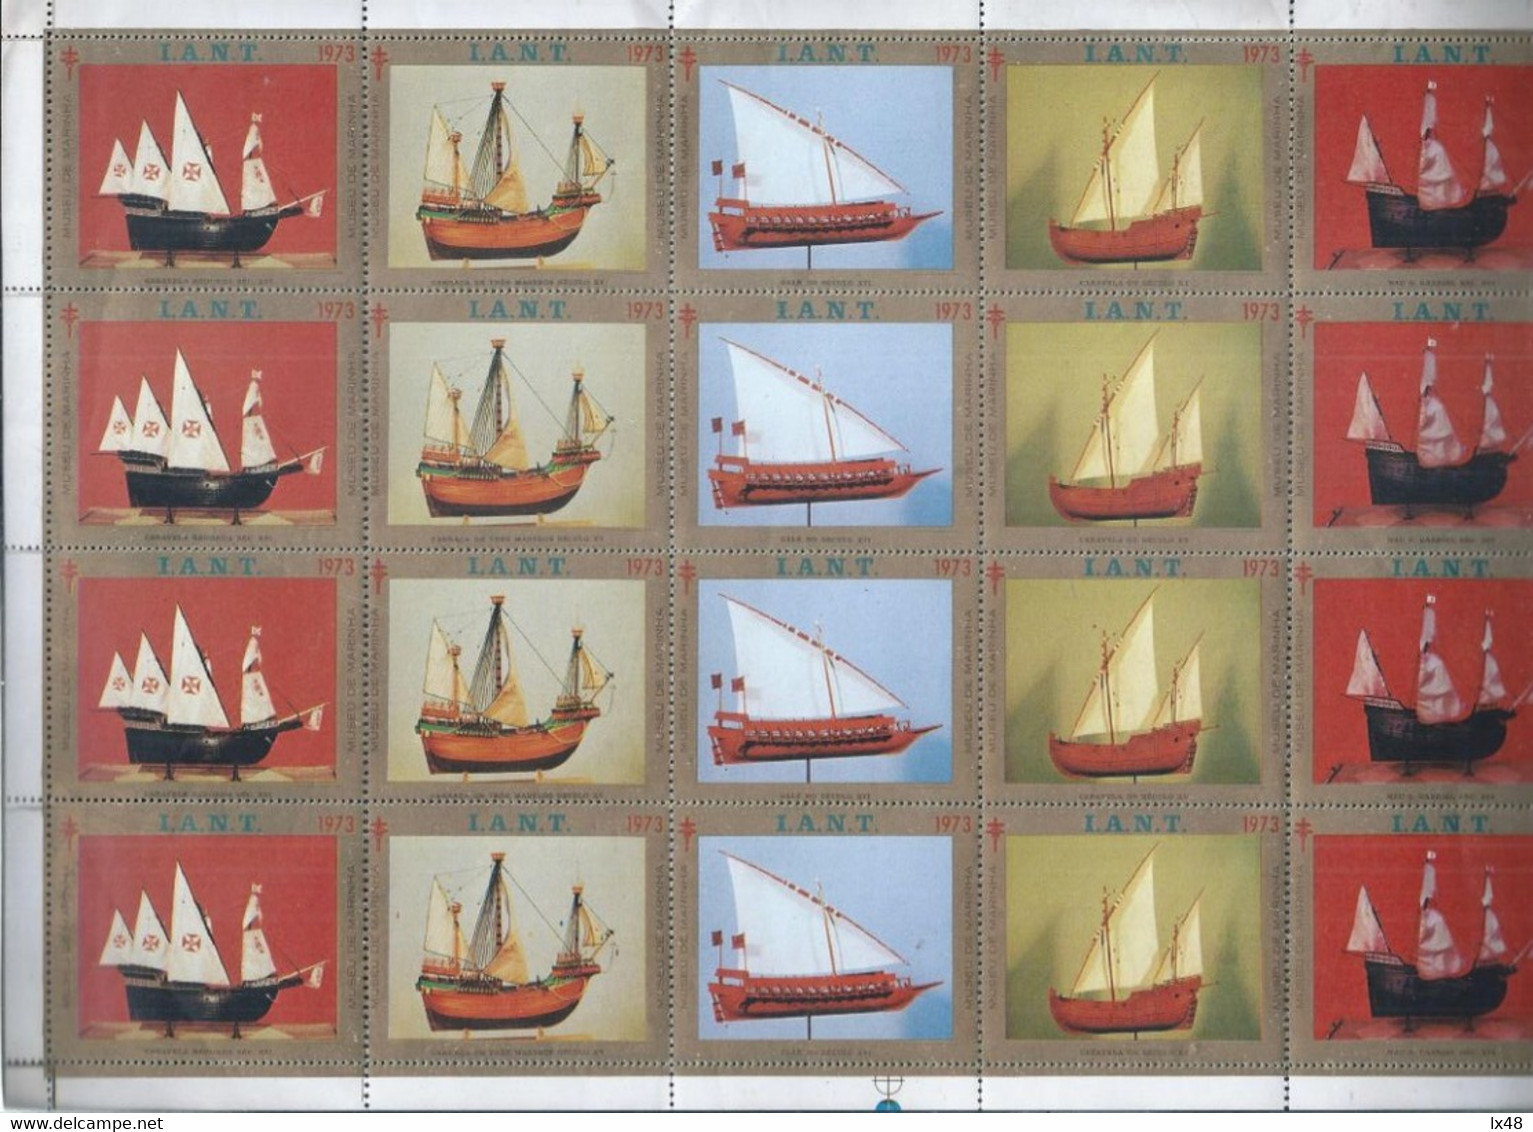 Tuberculosis. Tuberkulose. Sheet 20 Boat Vignettes From Navy Museum. Caravels And Ships 15th And 16th Centuries. Rare - Ortsausgaben